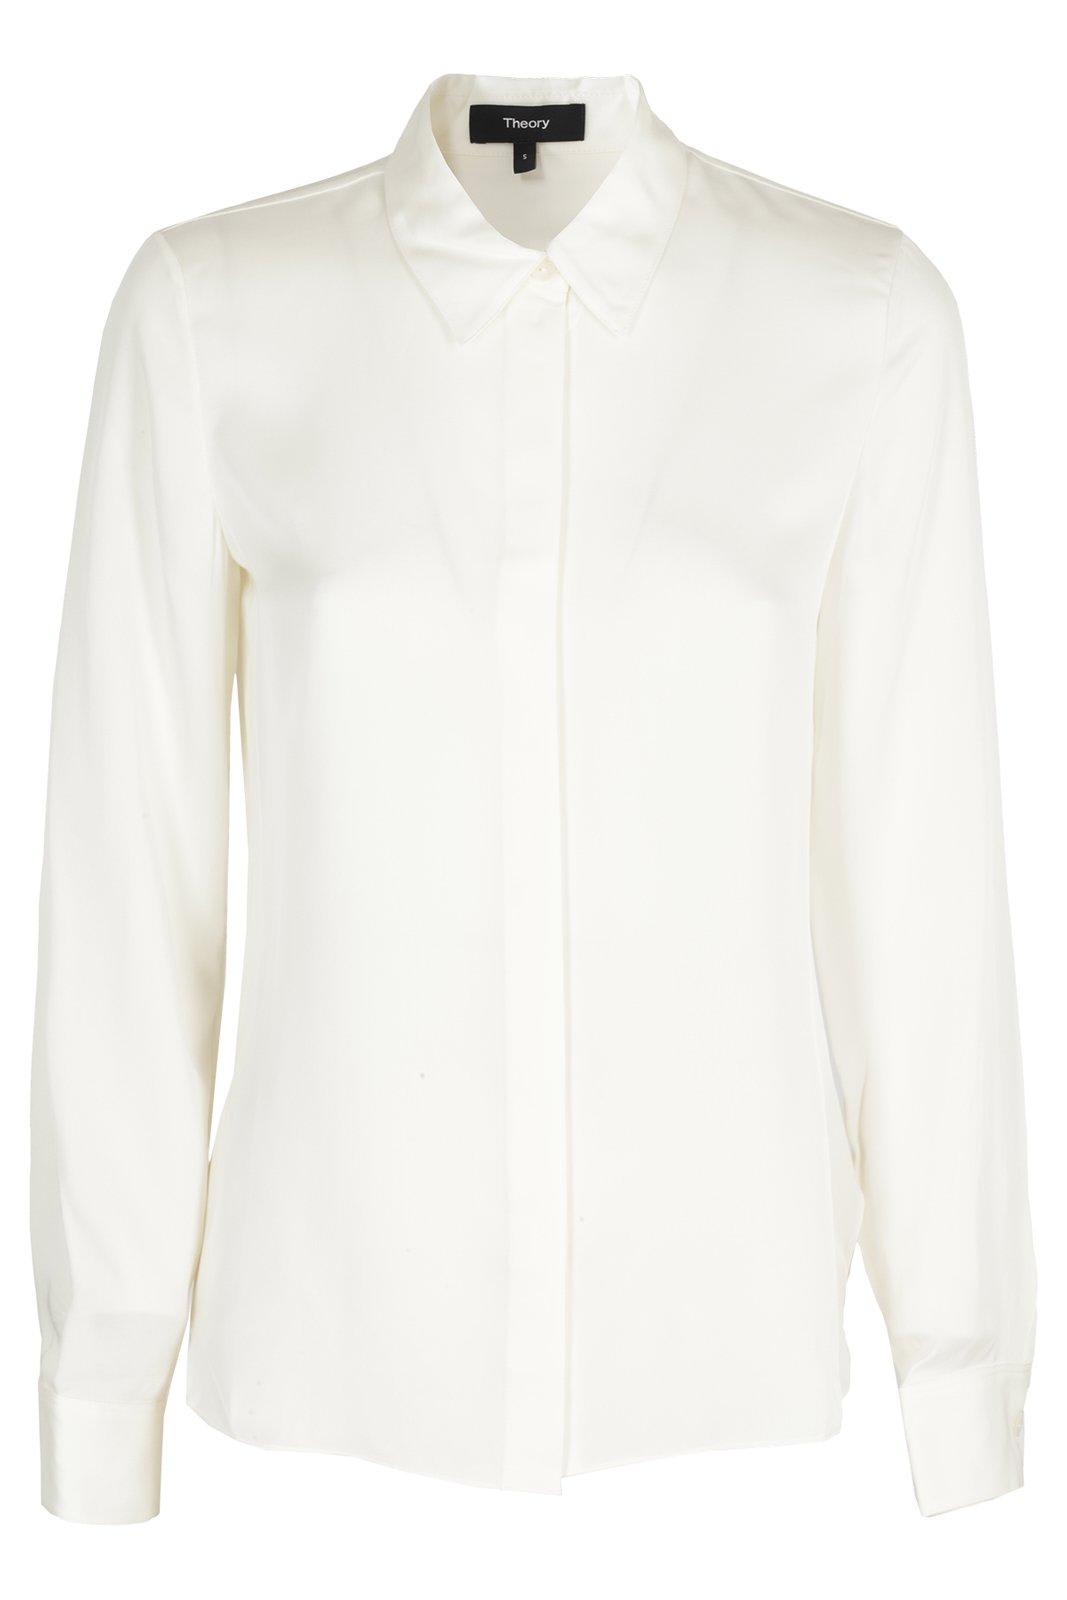 Theory Concealed Fastened Shirt In White